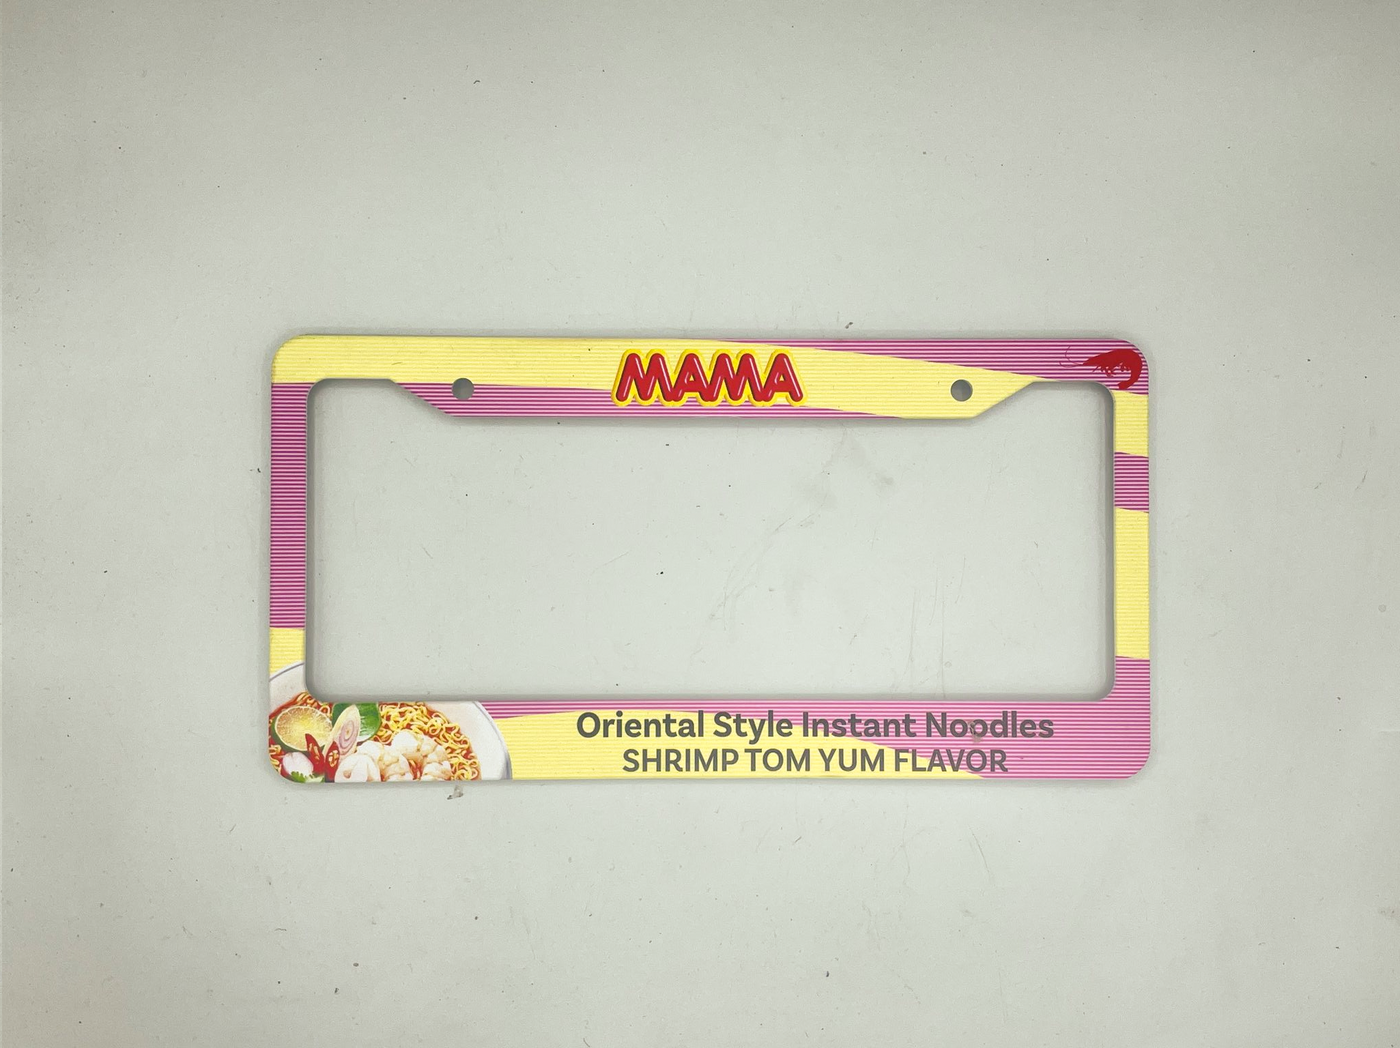 Mama noodles - Asian themed Plate Frames